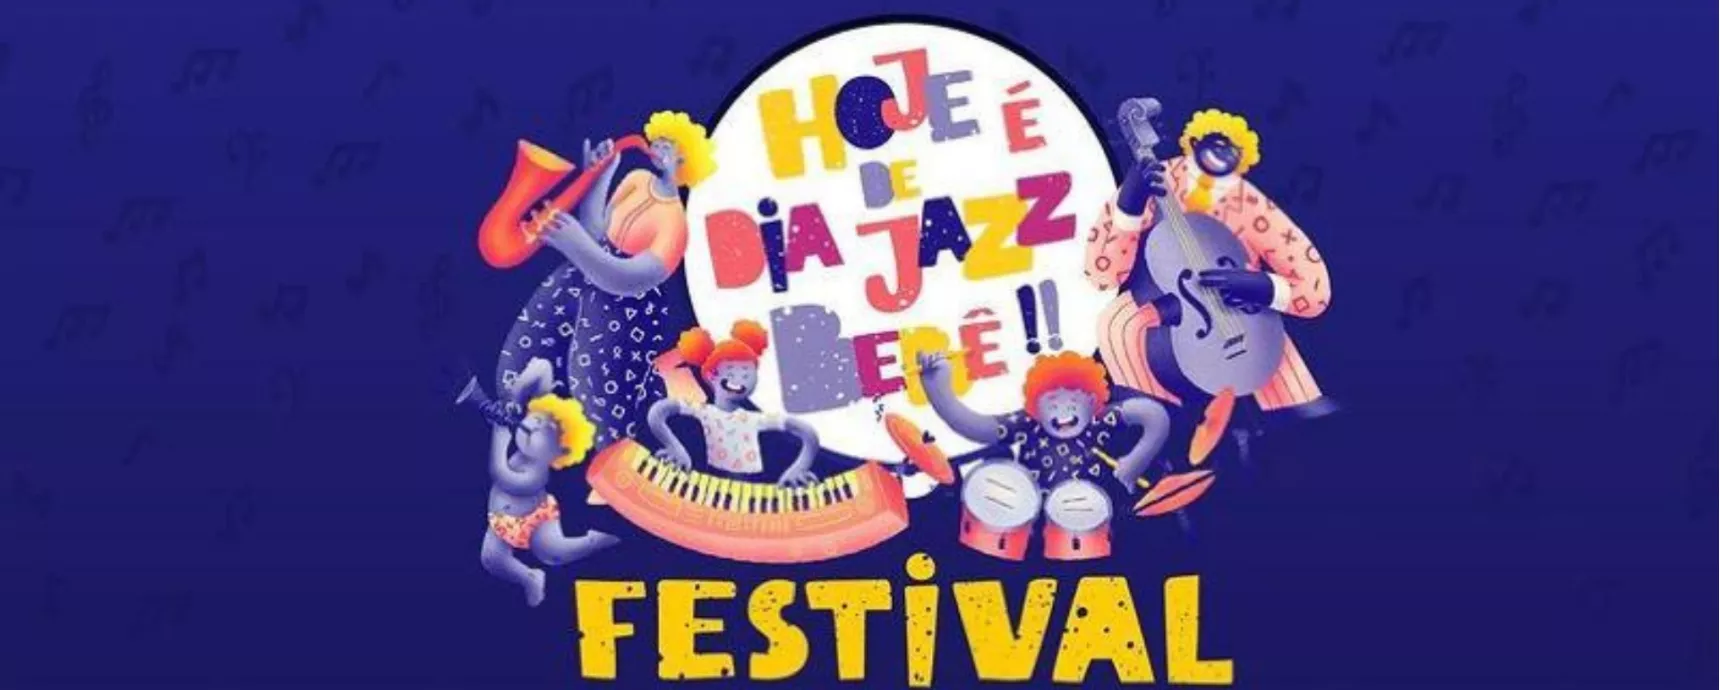 Event Today is Baby Jazz Day Festival is postponed